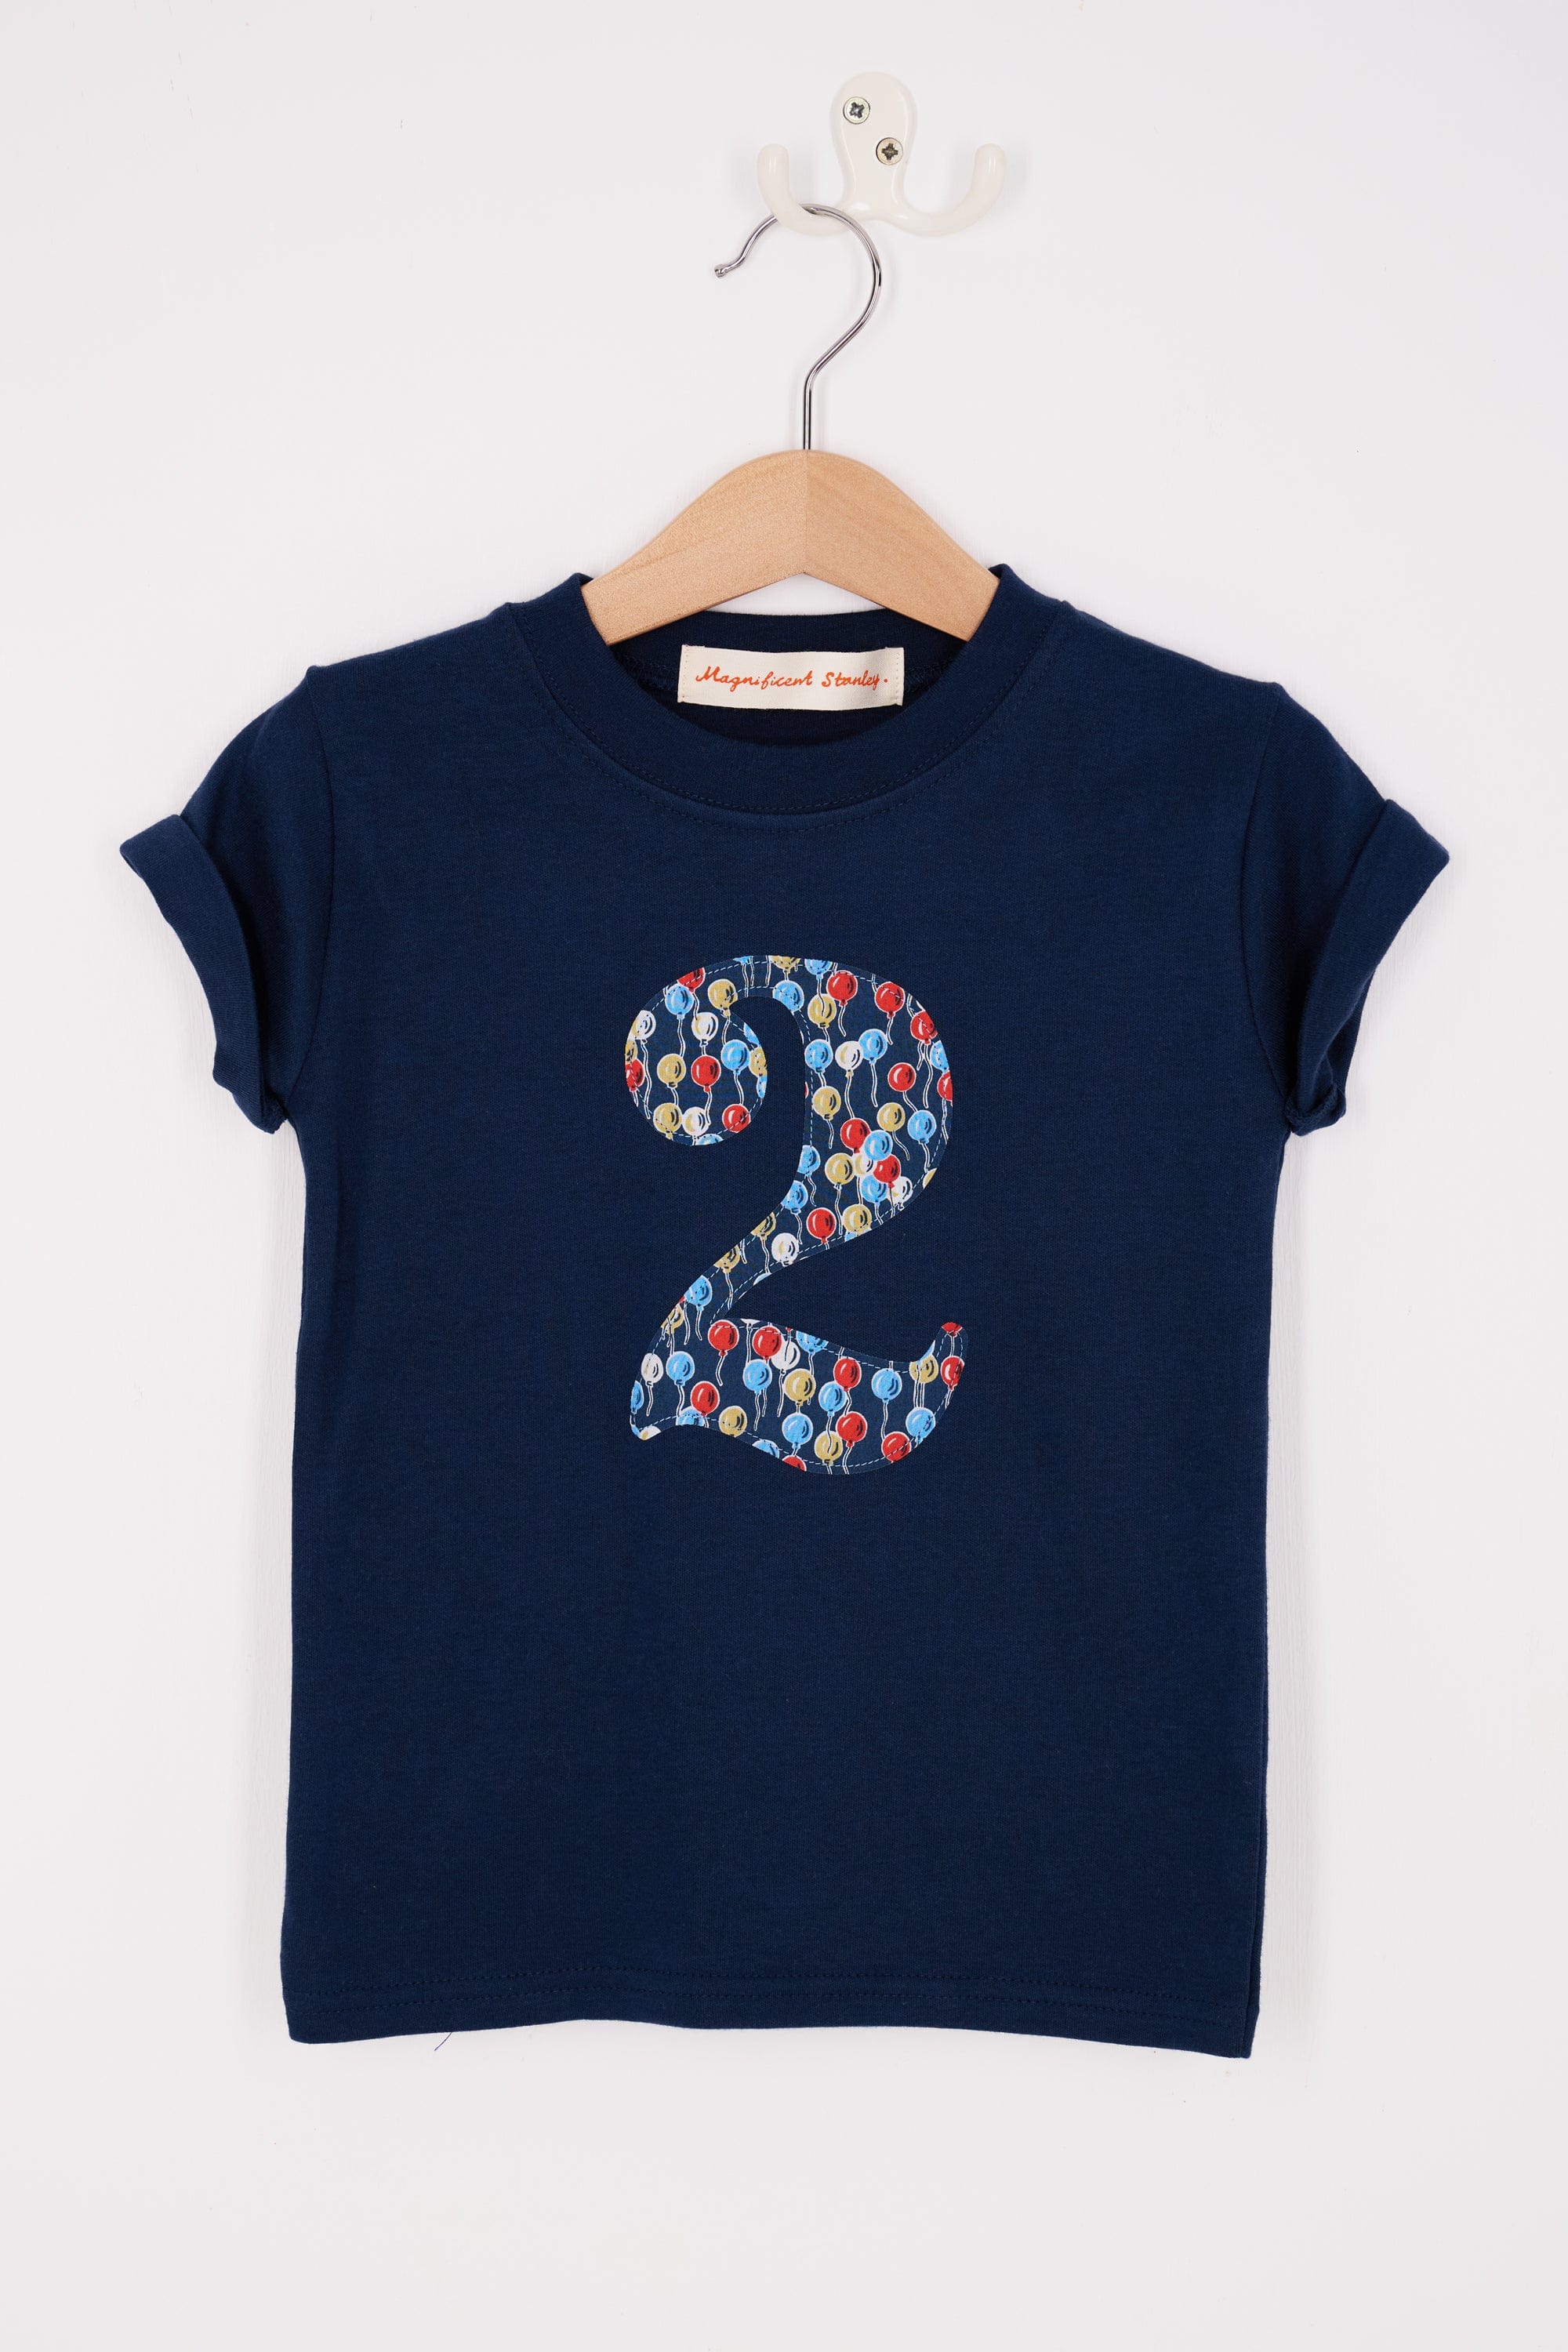 Magnificent Stanley Tee Number Navy T-Shirt in Ethan's Party Liberty Print